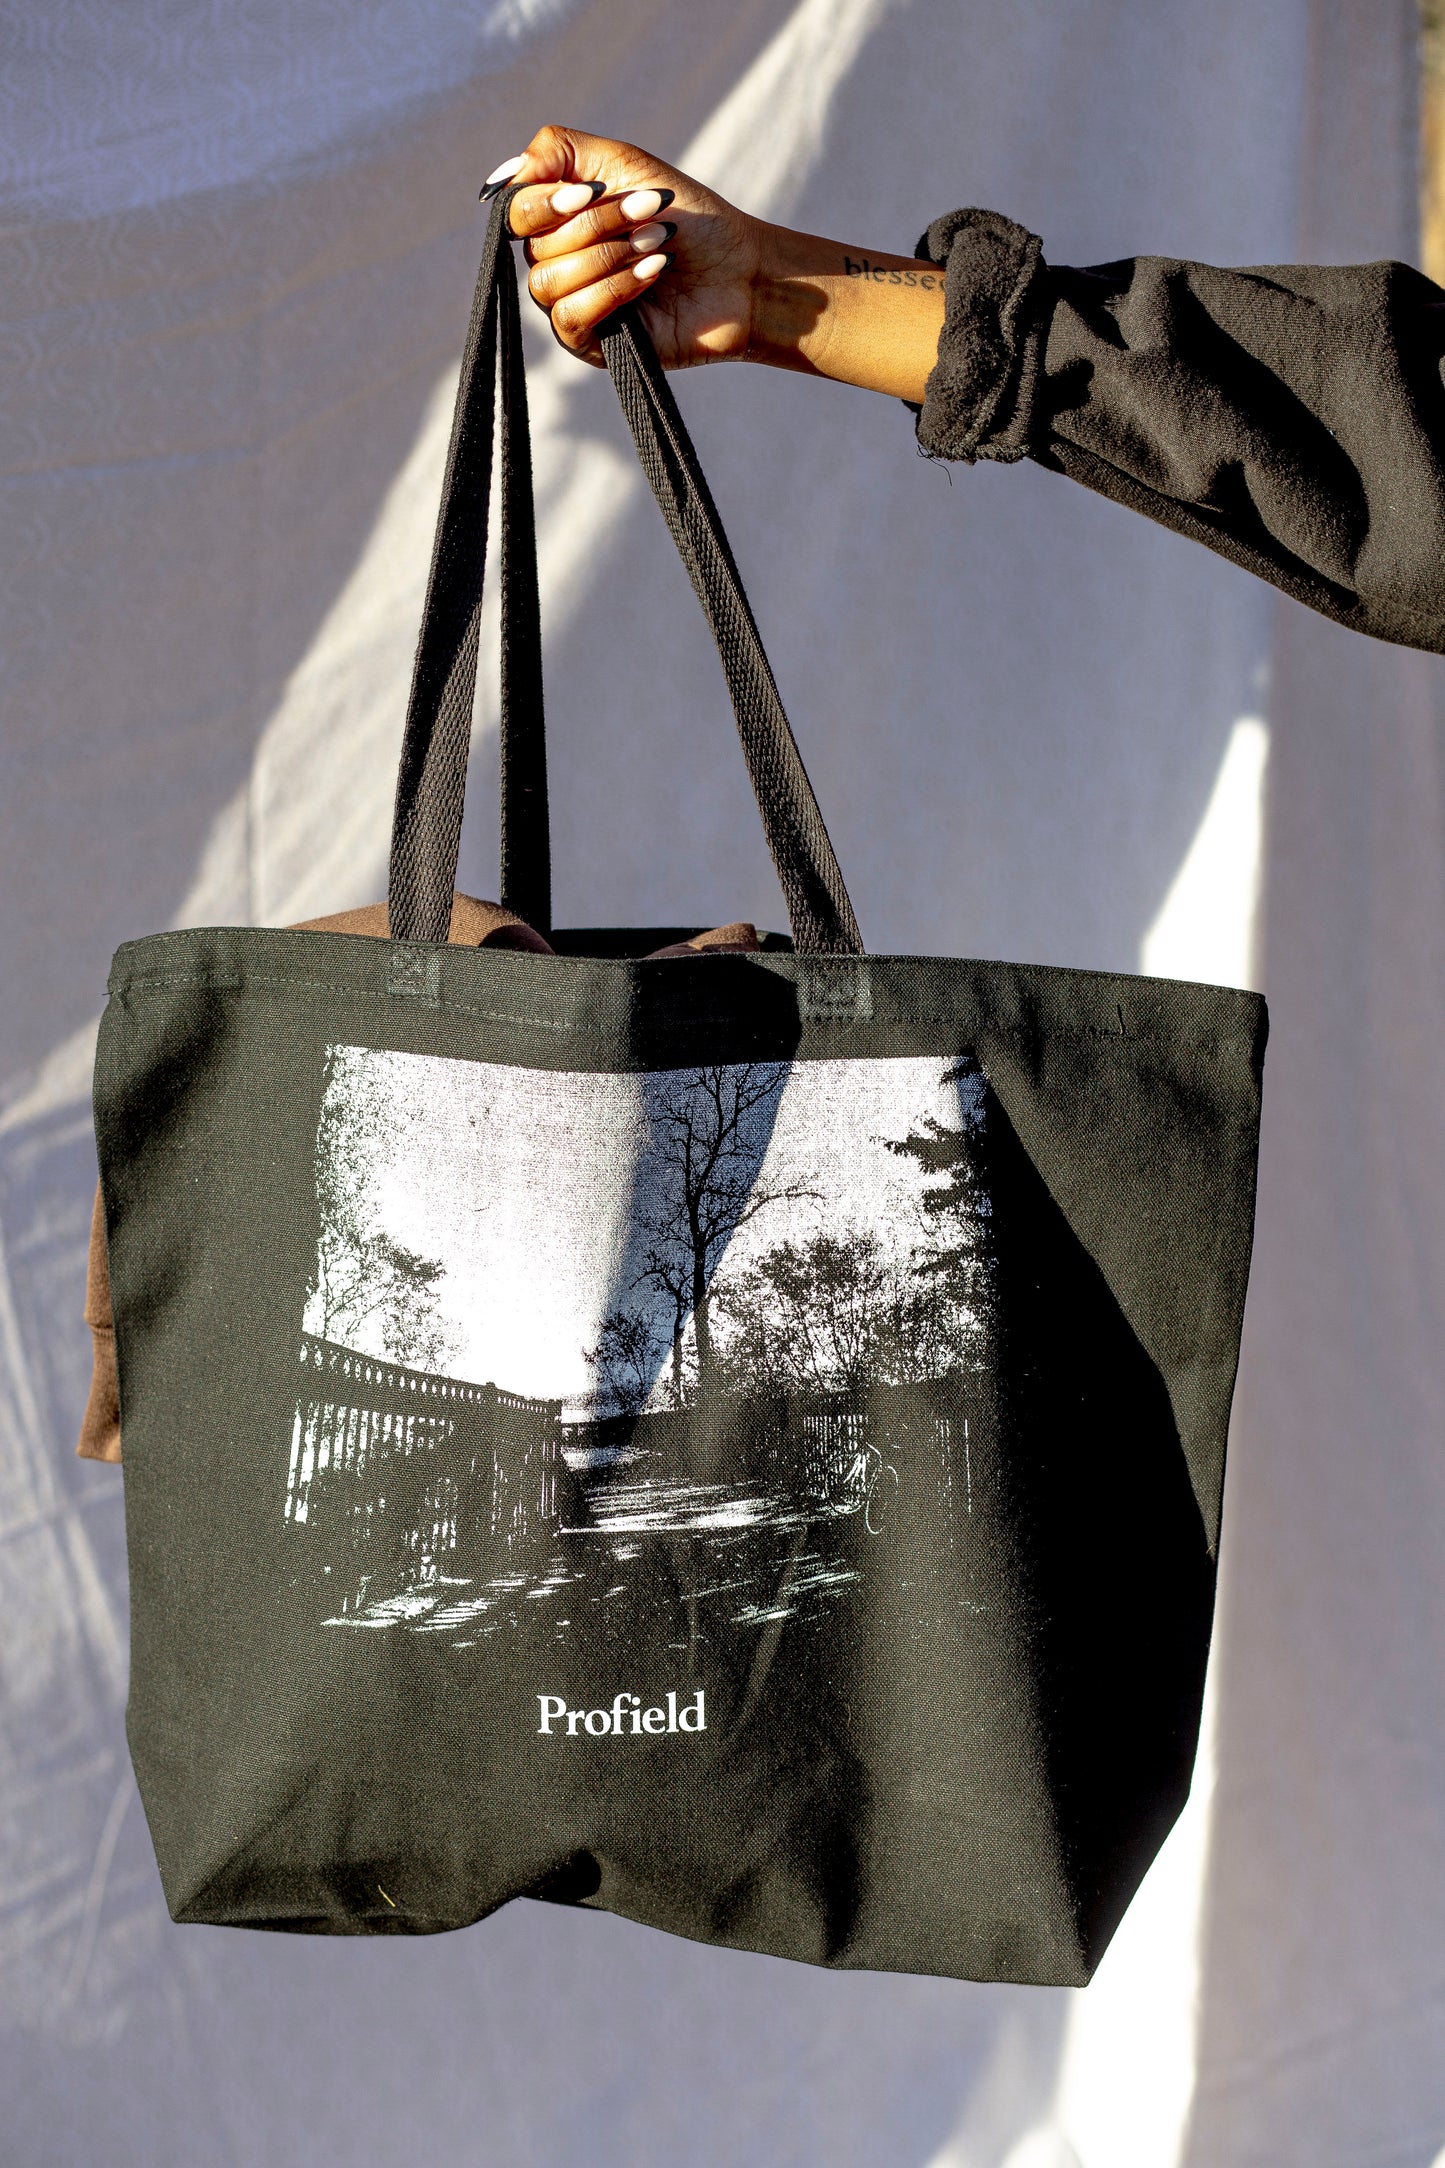 Profield Reserve x Great Rivers Greenway Tote Bag